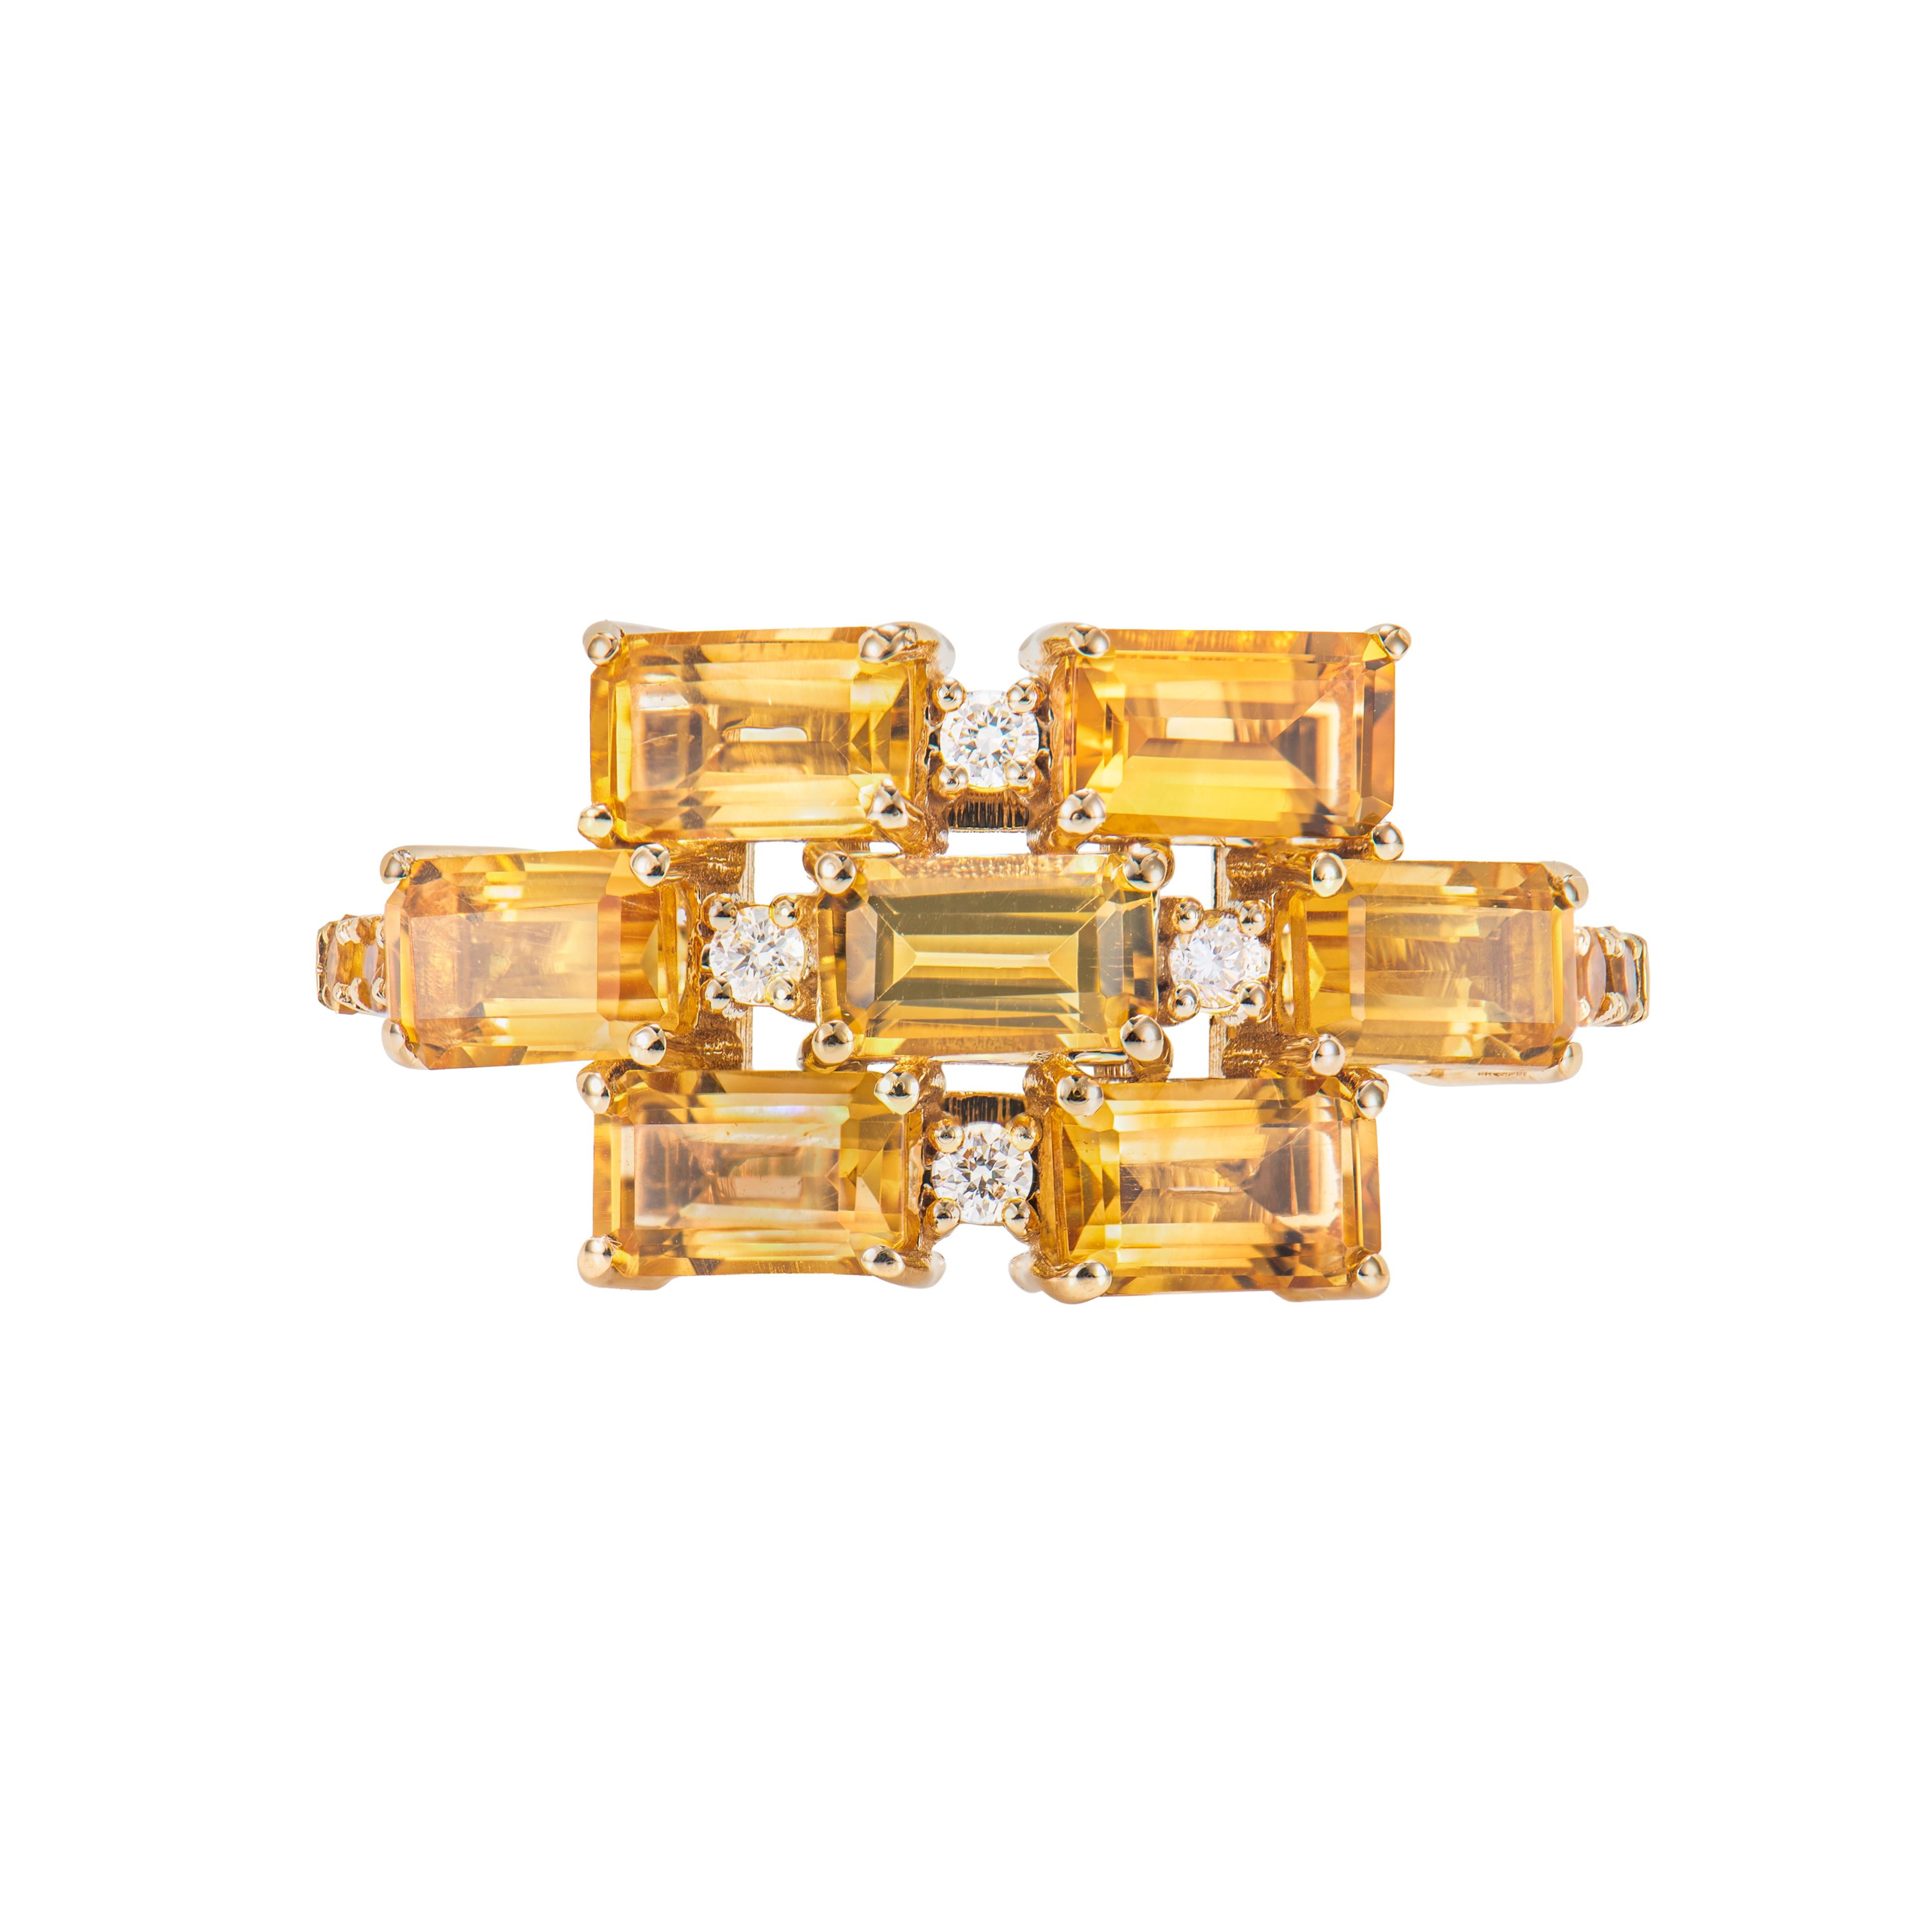 Contemporary 2.04 Carat Citrine Fancy Ring in 18Karat Yellow Gold with White Diamond.   For Sale